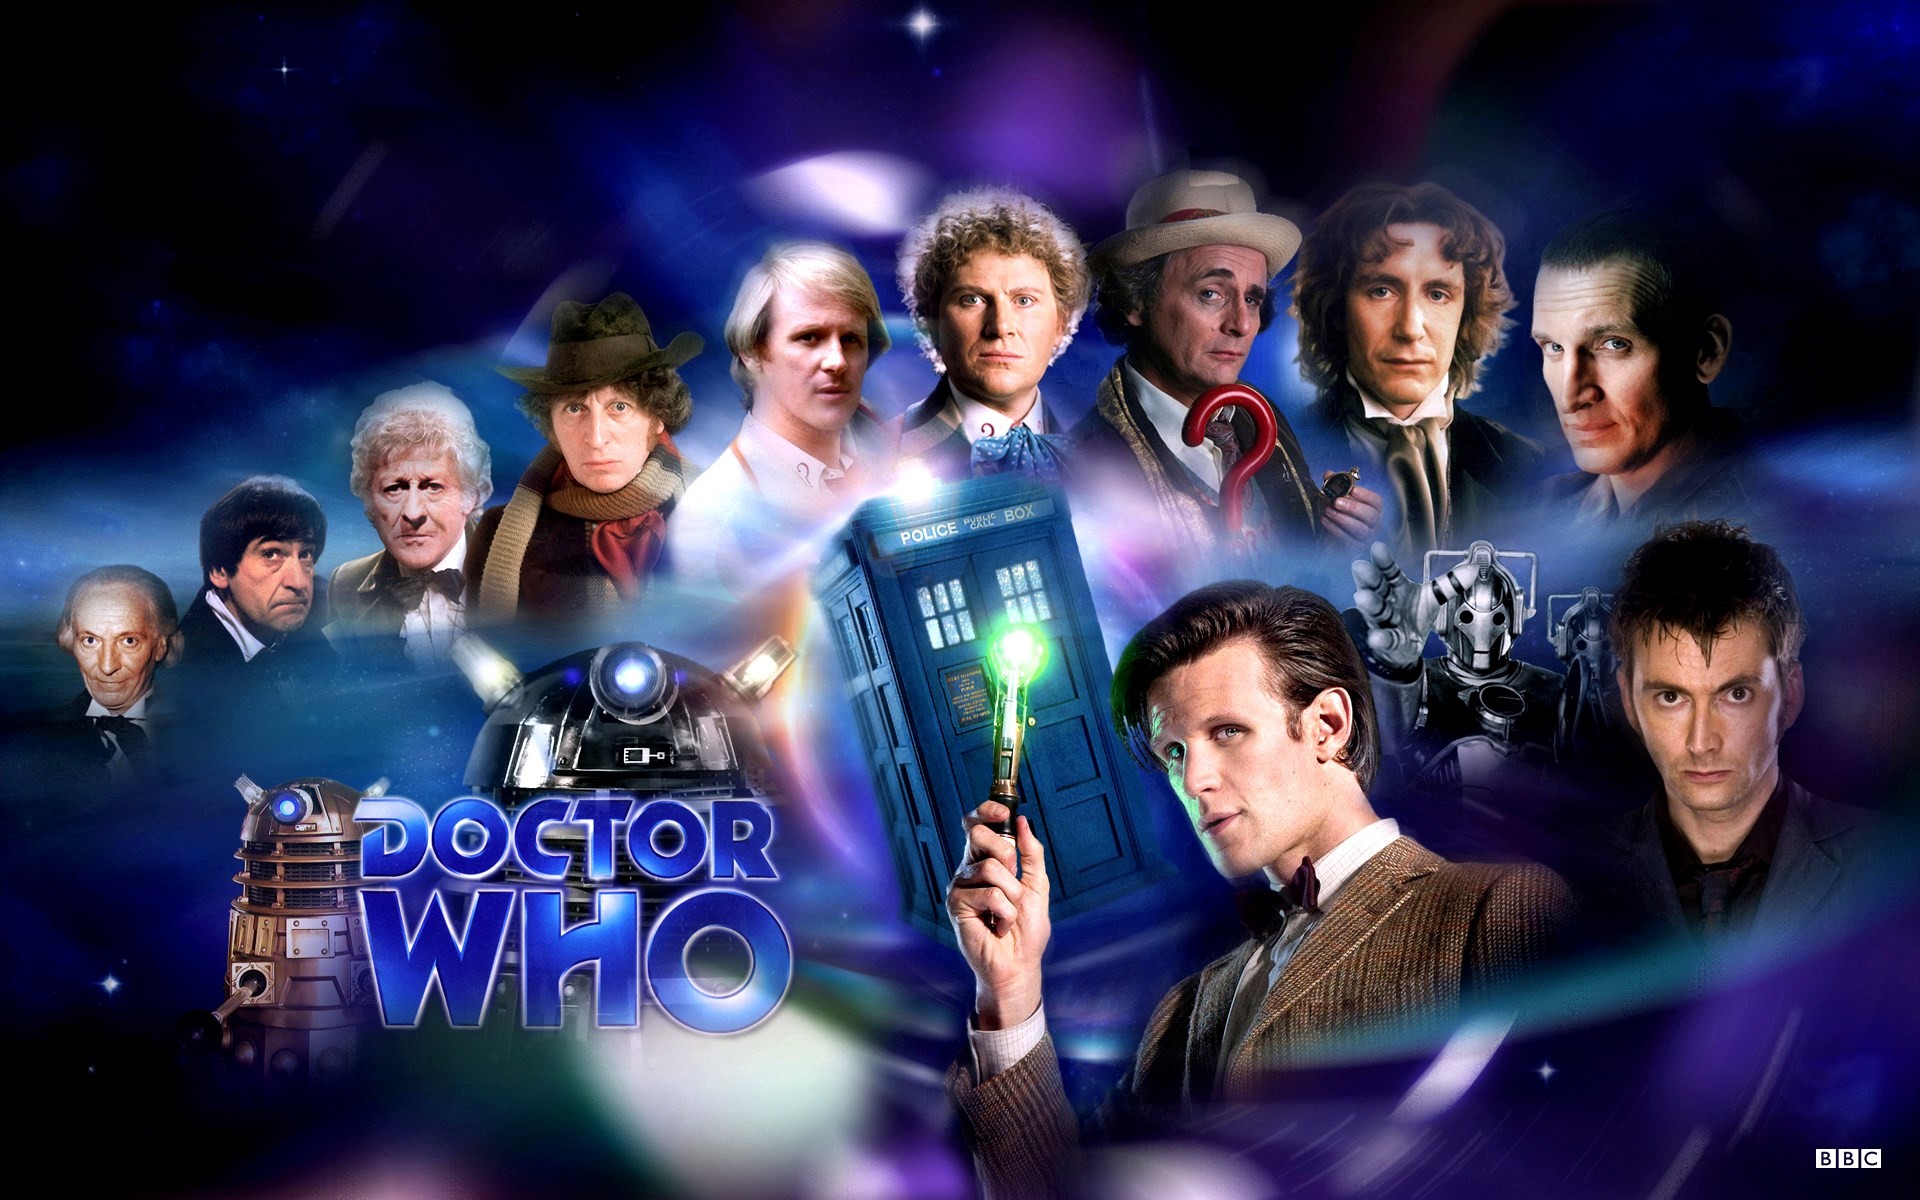 All of the doctors wallpaper